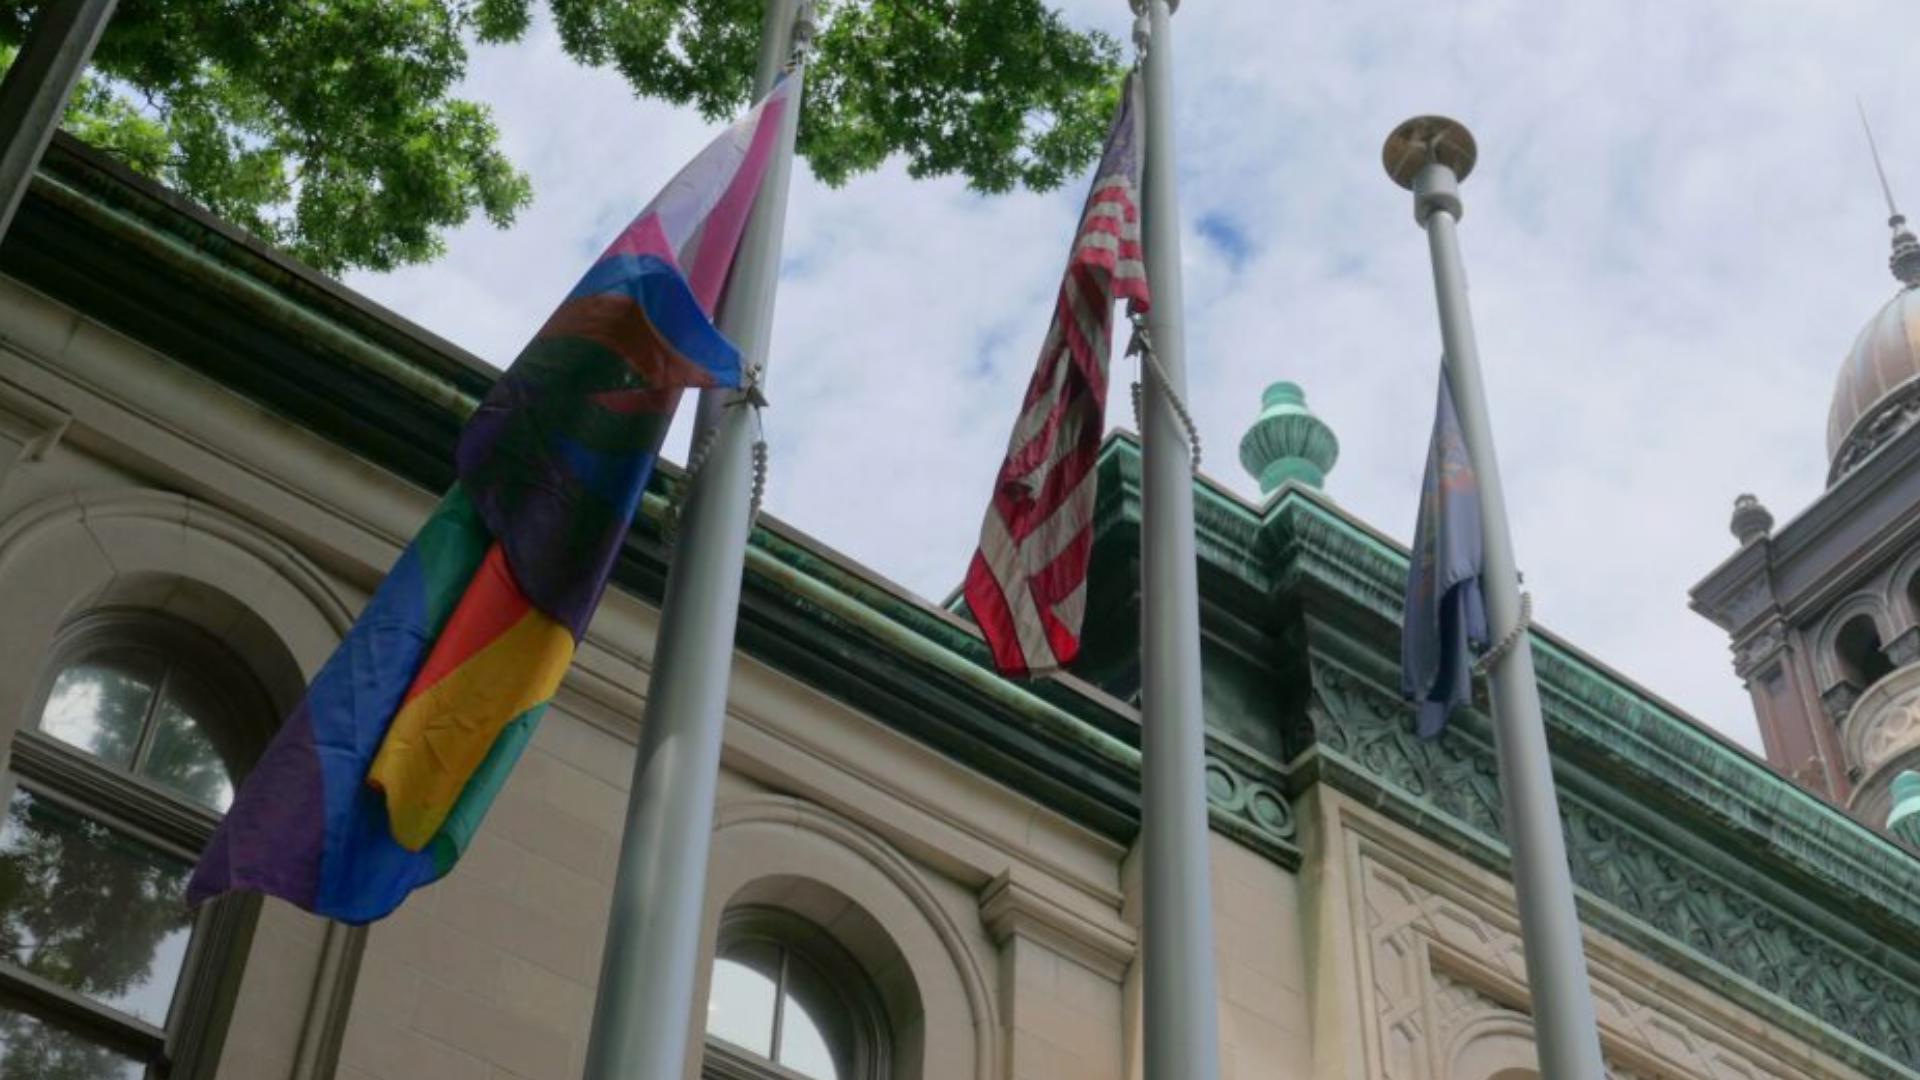 Members of the Lancaster City community gathered at City Hall on Monday to raise the Pride flag.